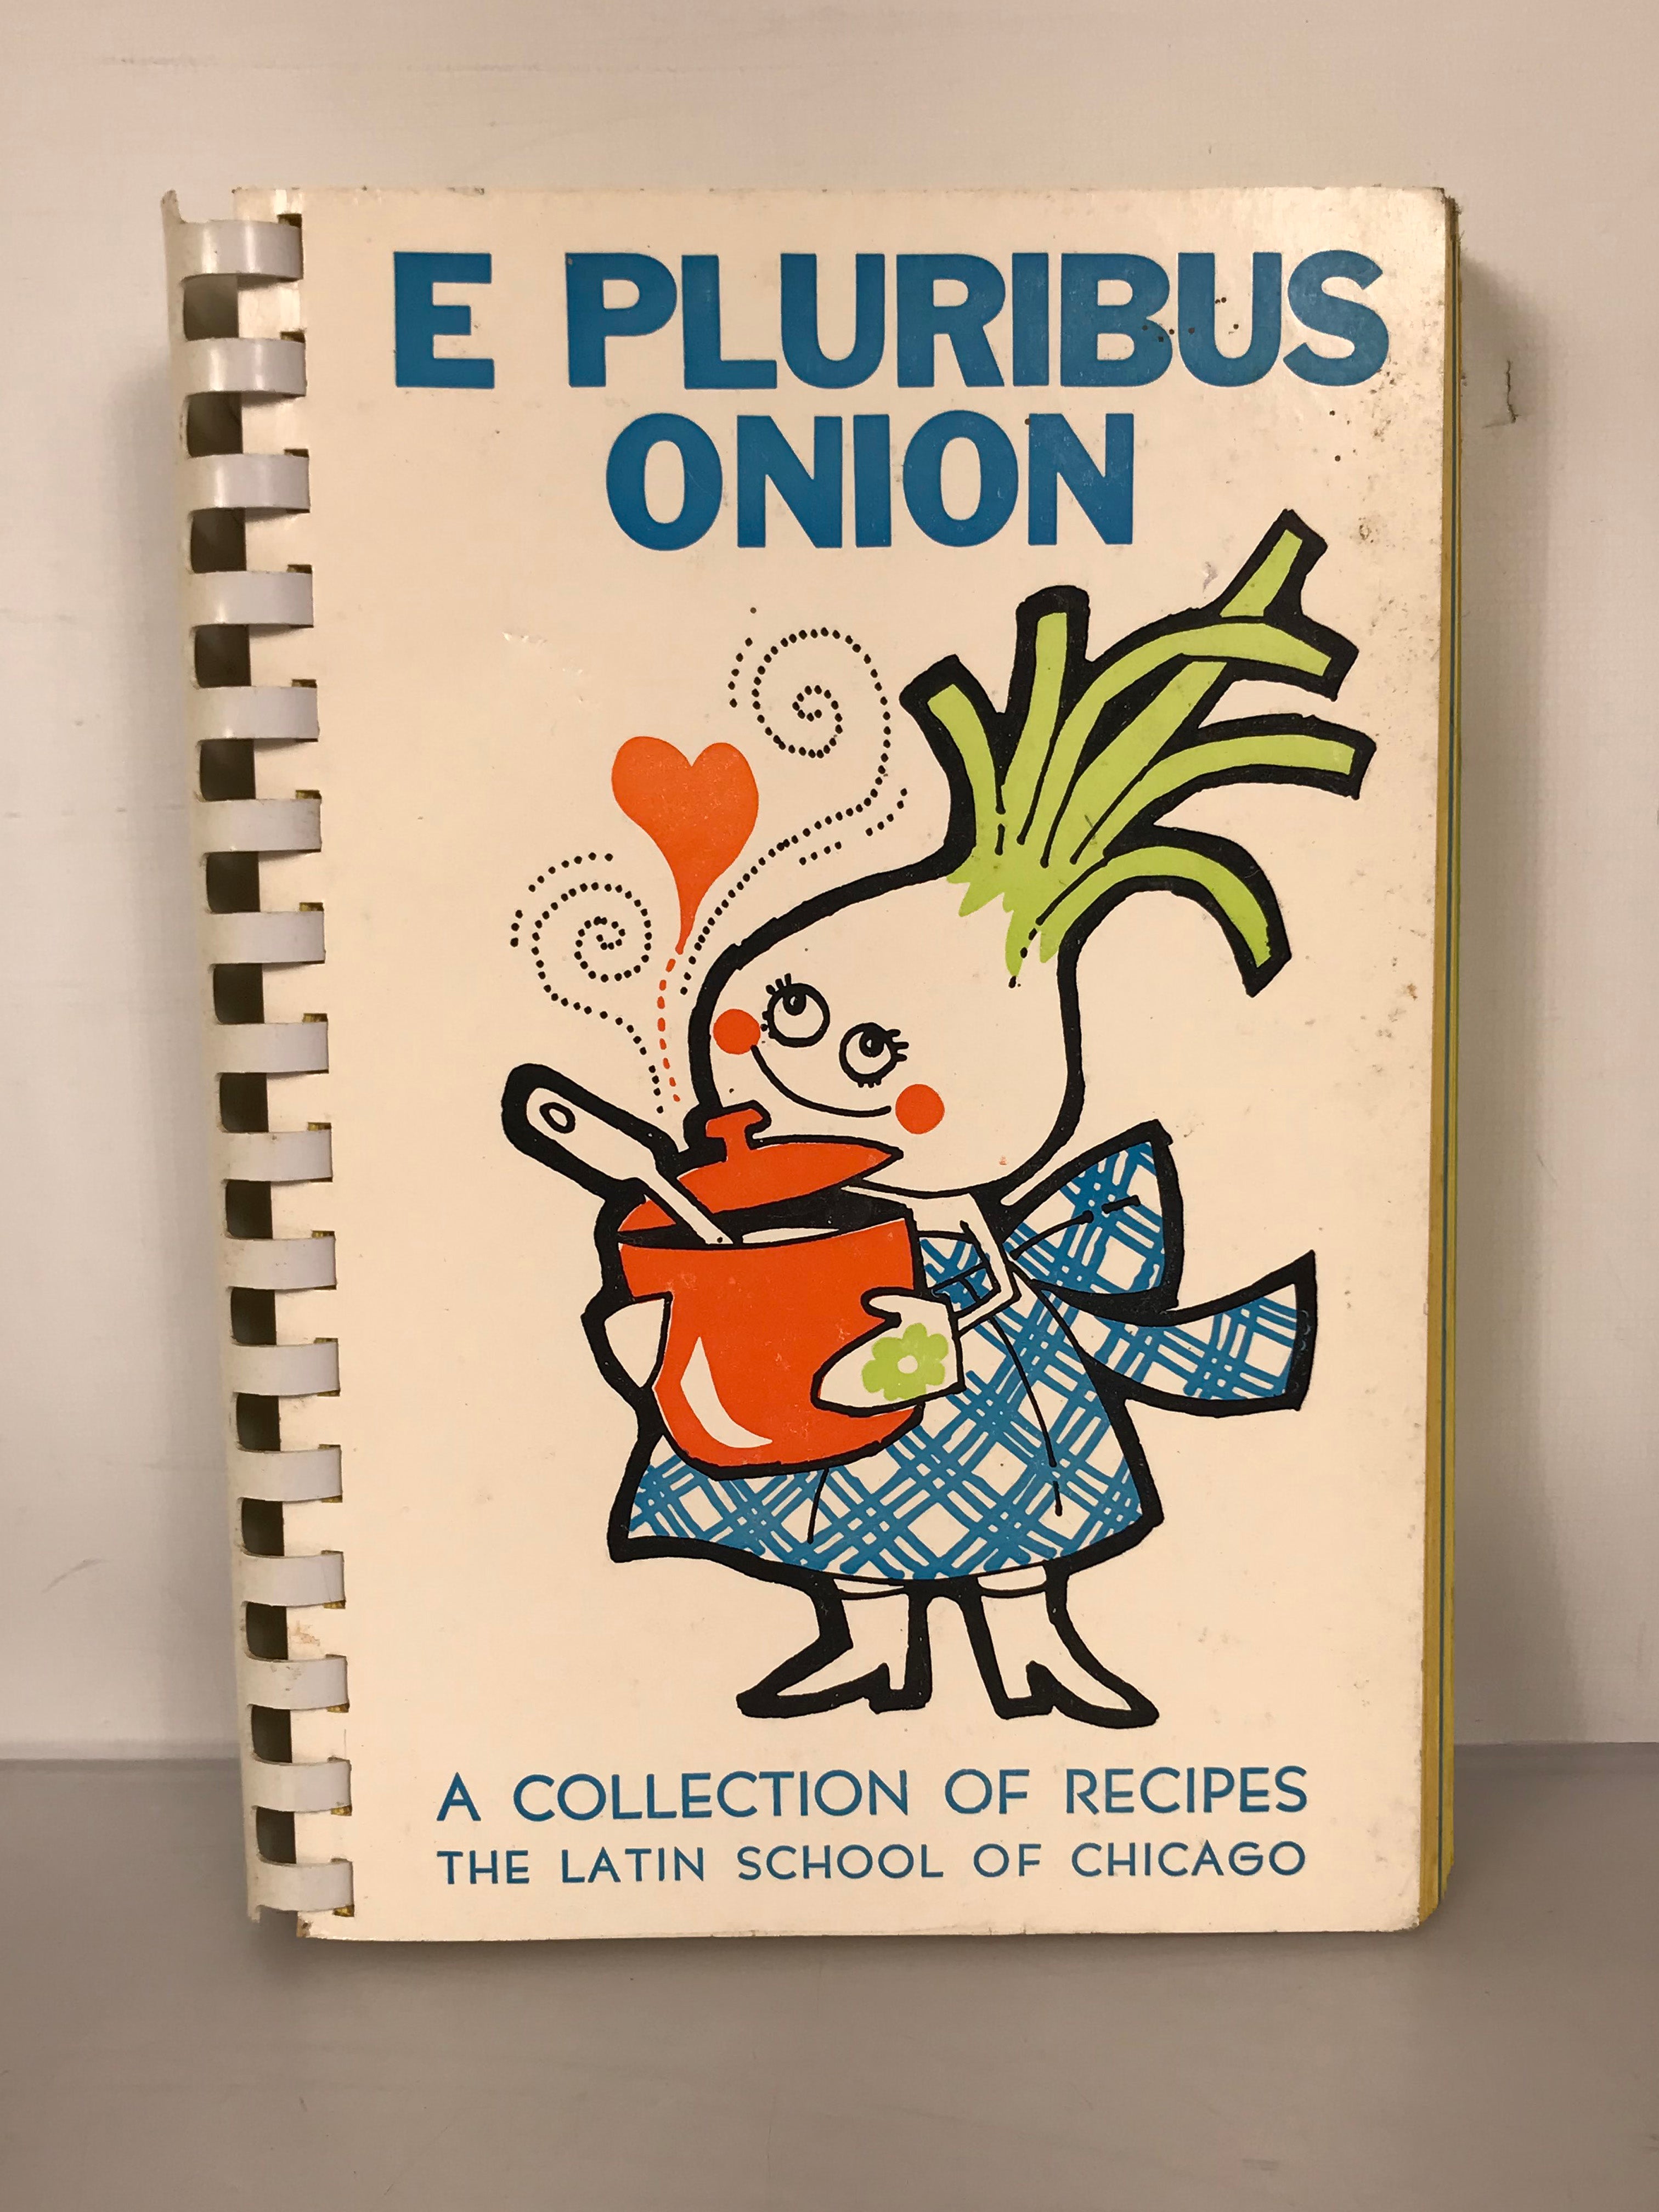 E Pluribus Onion A Collections of Recipes The Latin School of Chicago 1976